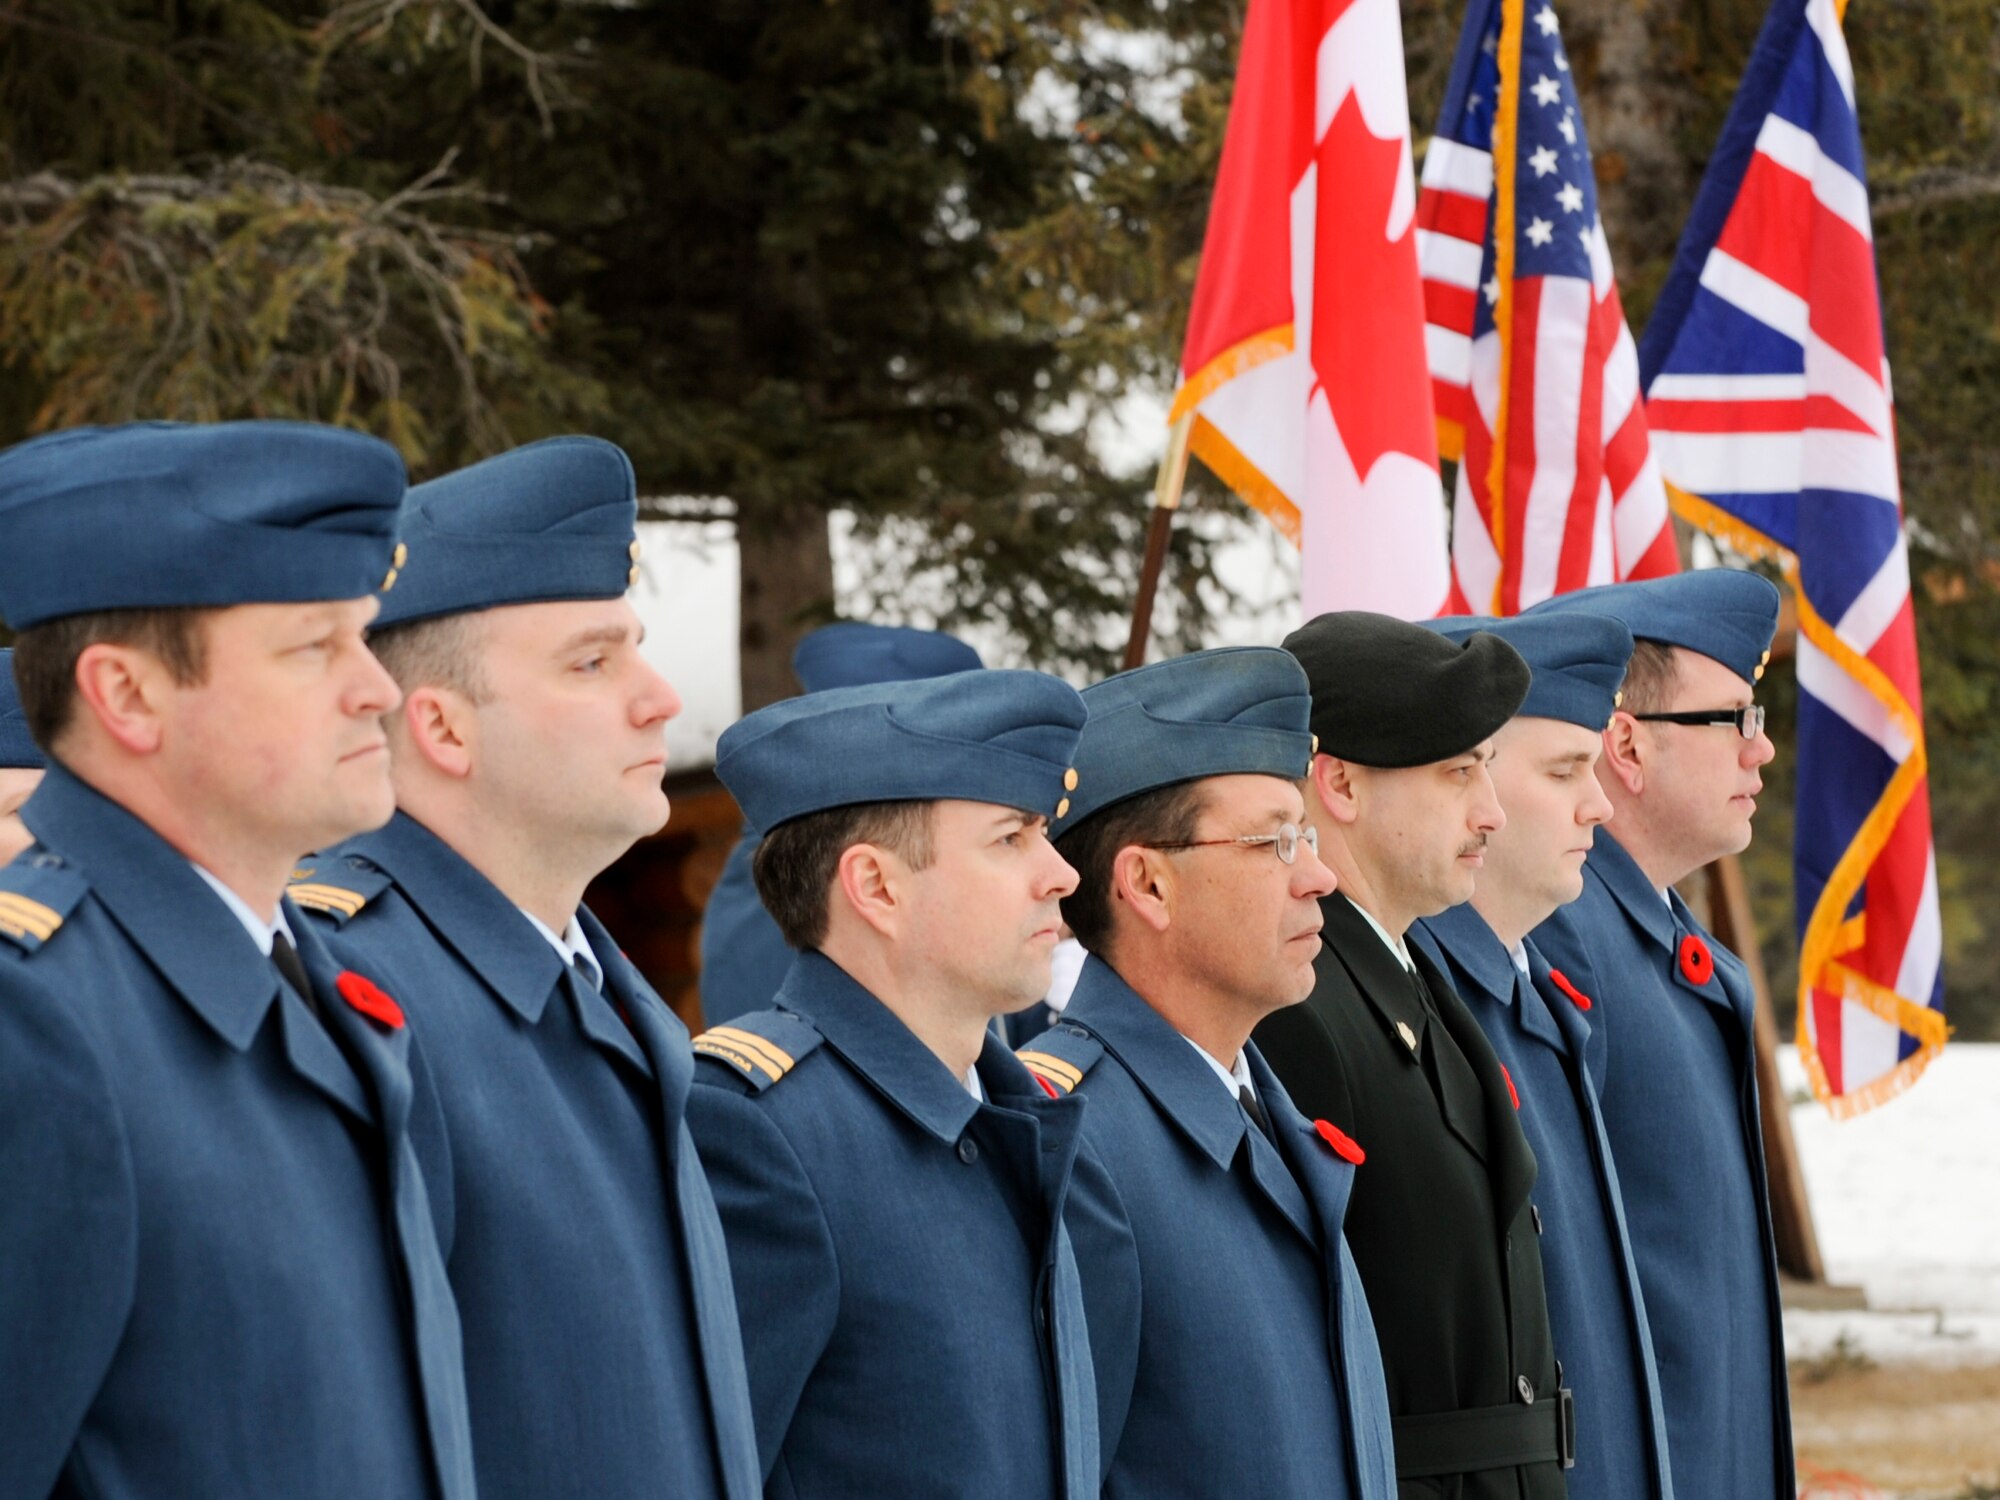 FORT RICHARDSON, Alaska -- Members of the Canadian Armed Forces stand in formation during the Veterans Day Memorial Ceremony at Fort Richardson National Cemetery Nov. 11. The ceremony hosted by the Canadian Forces represented all servicemembers who fought in America's past and present wars. (U.S. Air Force photo/Staff Sgt. Joshua Garcia)